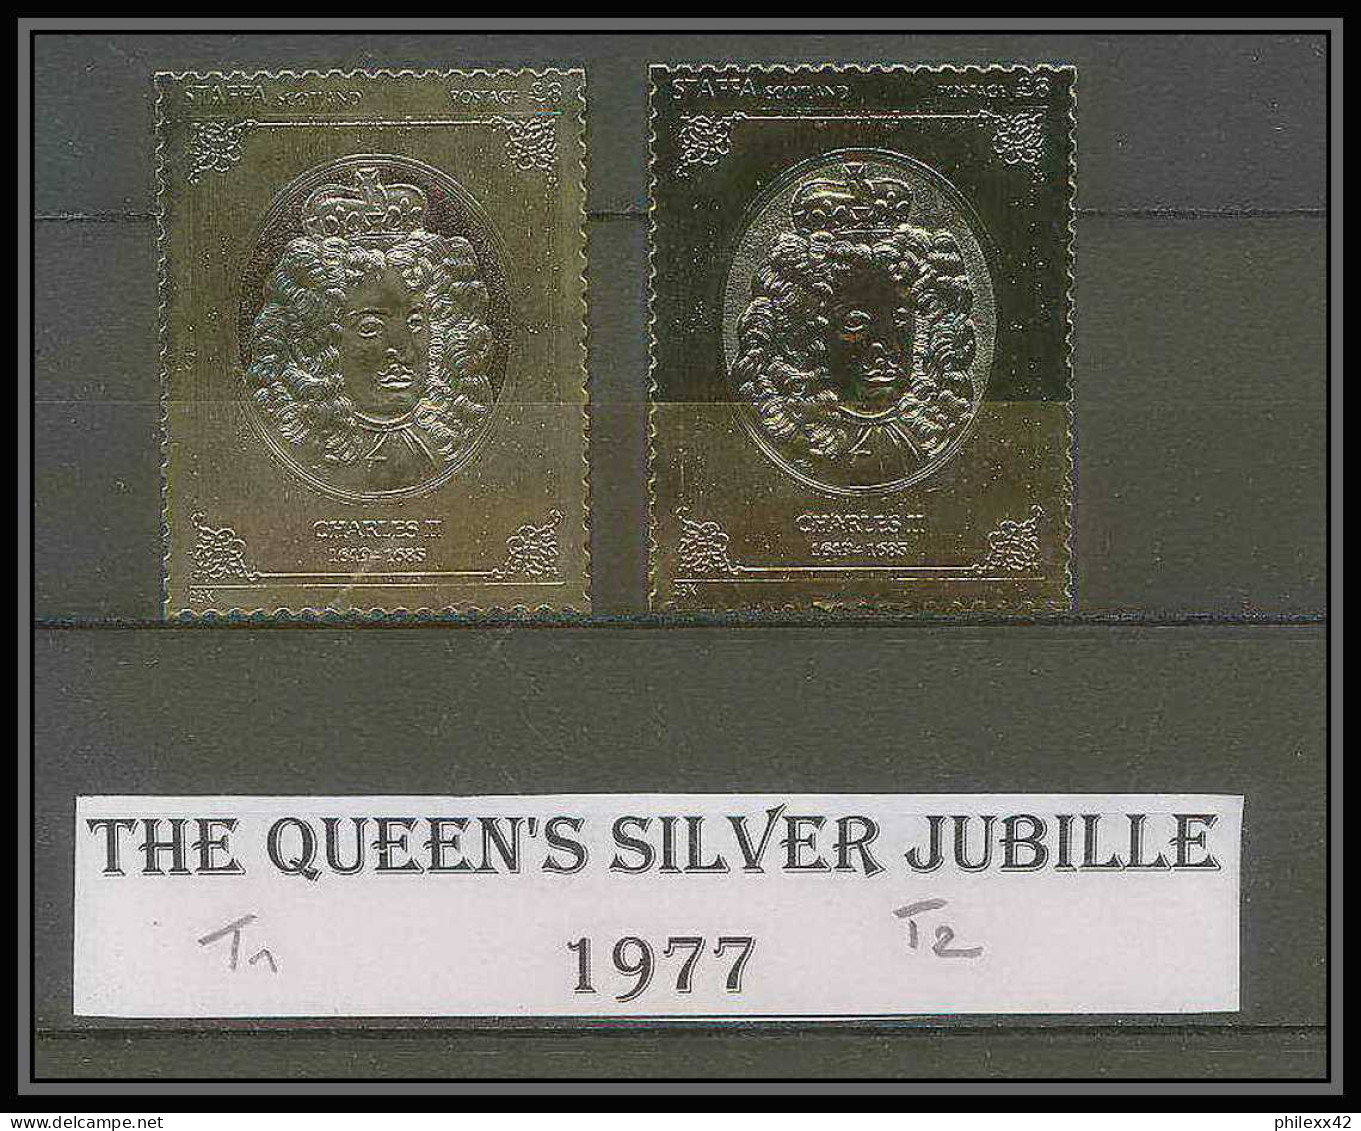 462a Staffa Scotland The Queen's Silver Jubilee 1977 OR Gold Stamps Monarchy United Kingdom Charles 2 Type 1& 2 ** - Escocia